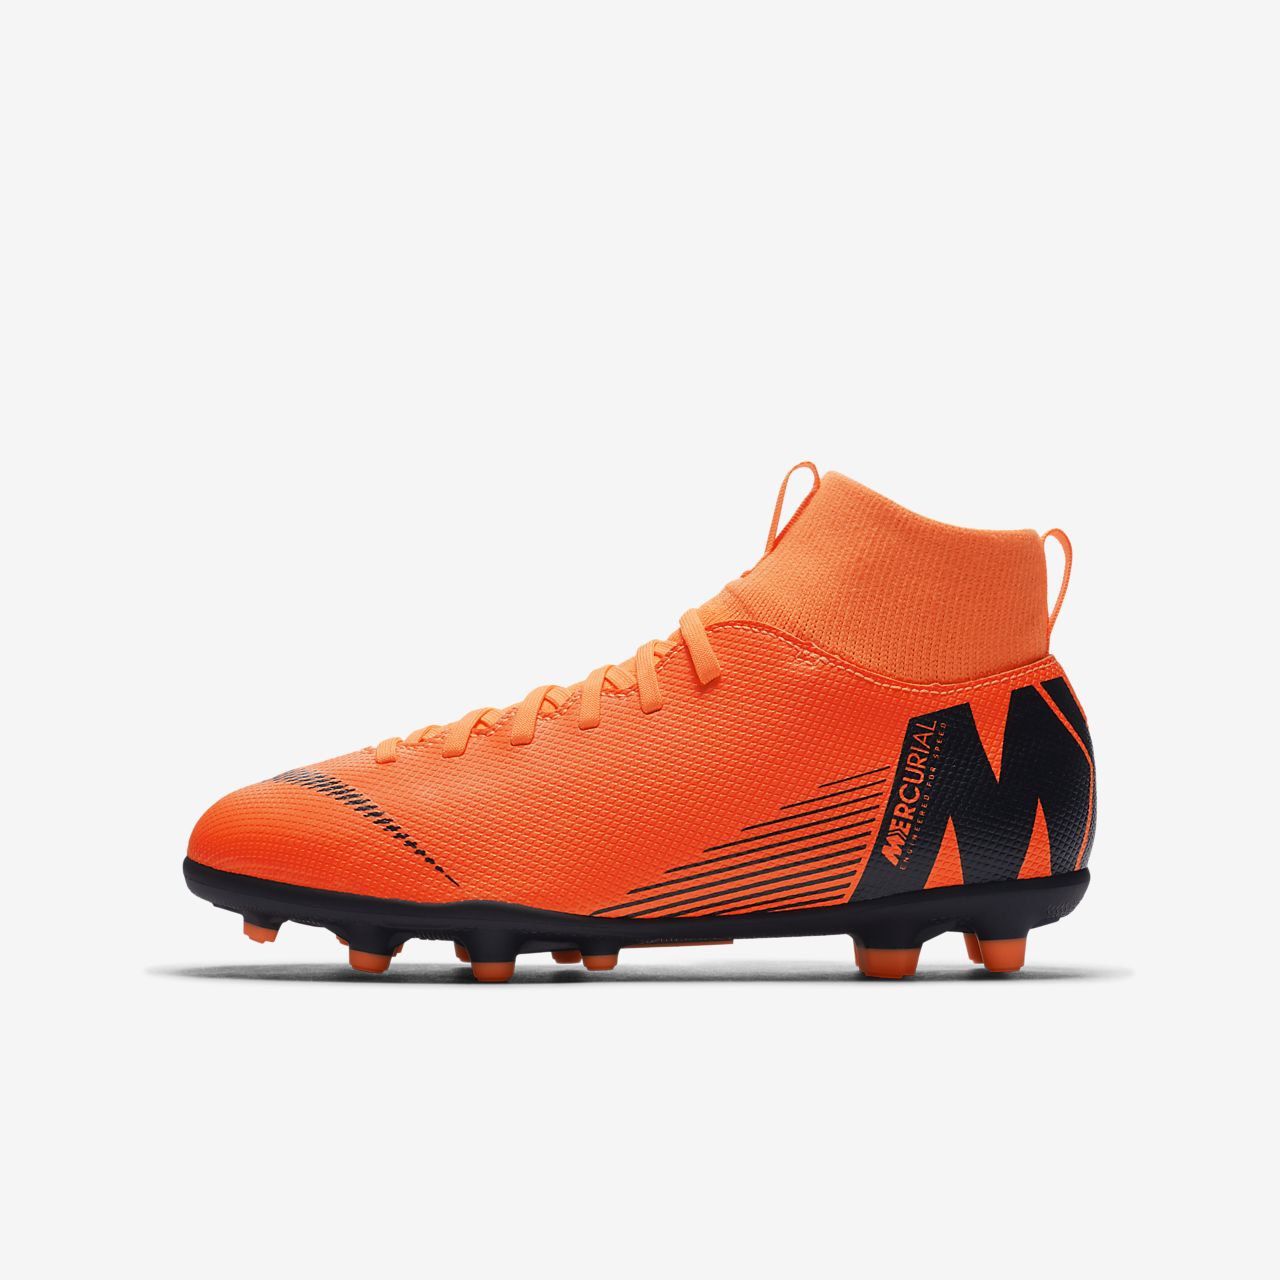 Buy Nike Mercurial Superfly VI Pro Firm Ground Only $ 65.